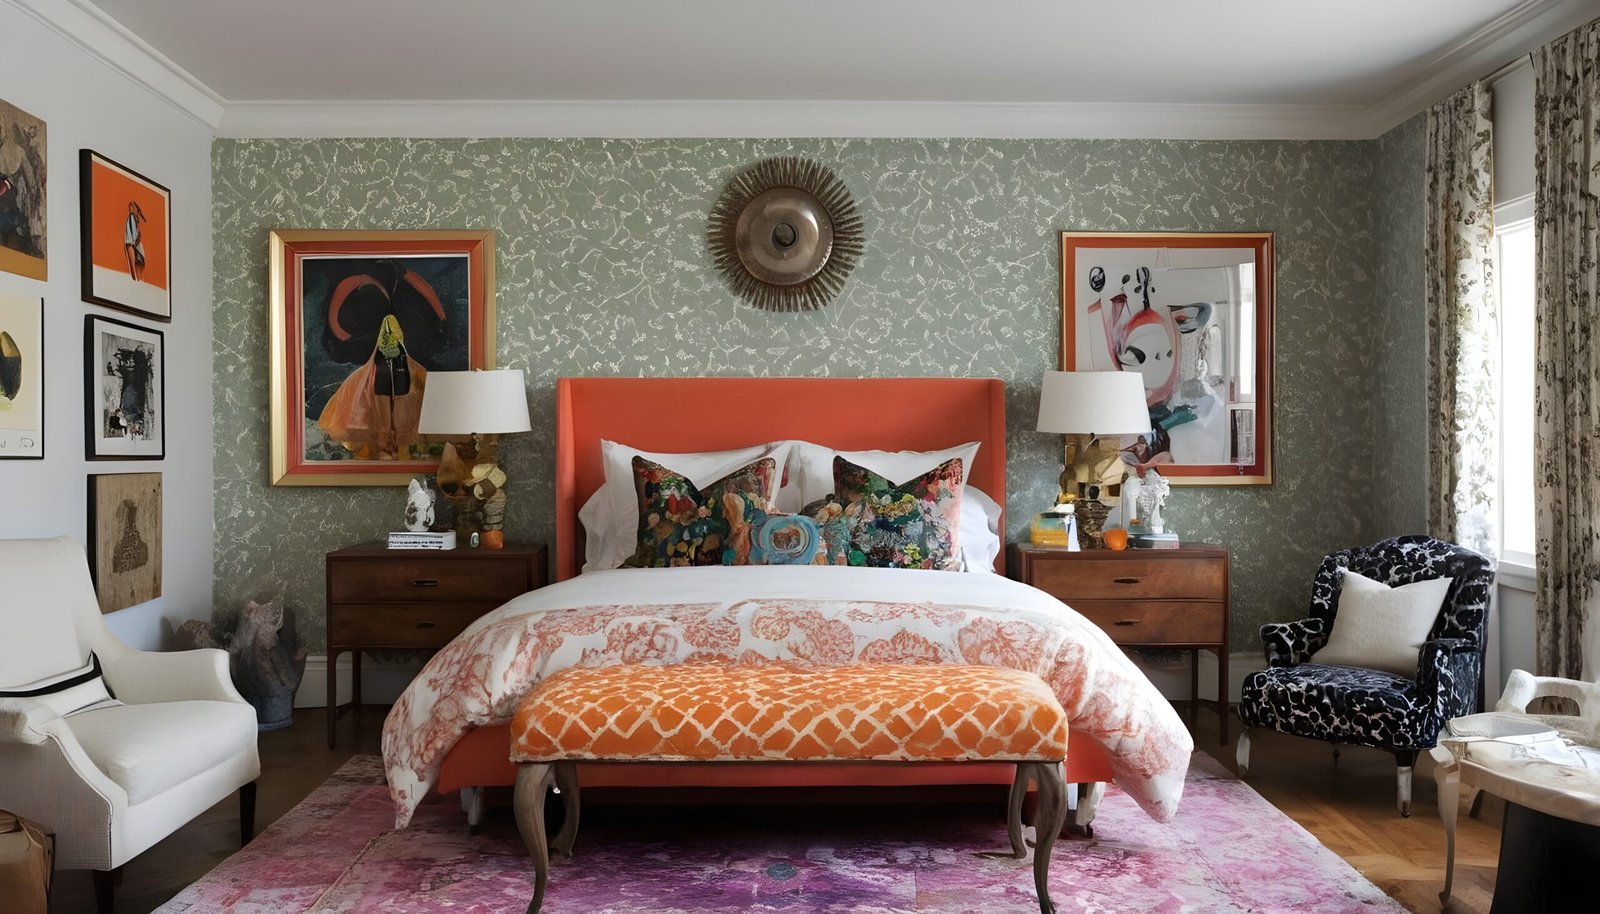 A bedroom with bold colors and patterns, a big couch, and artwork.